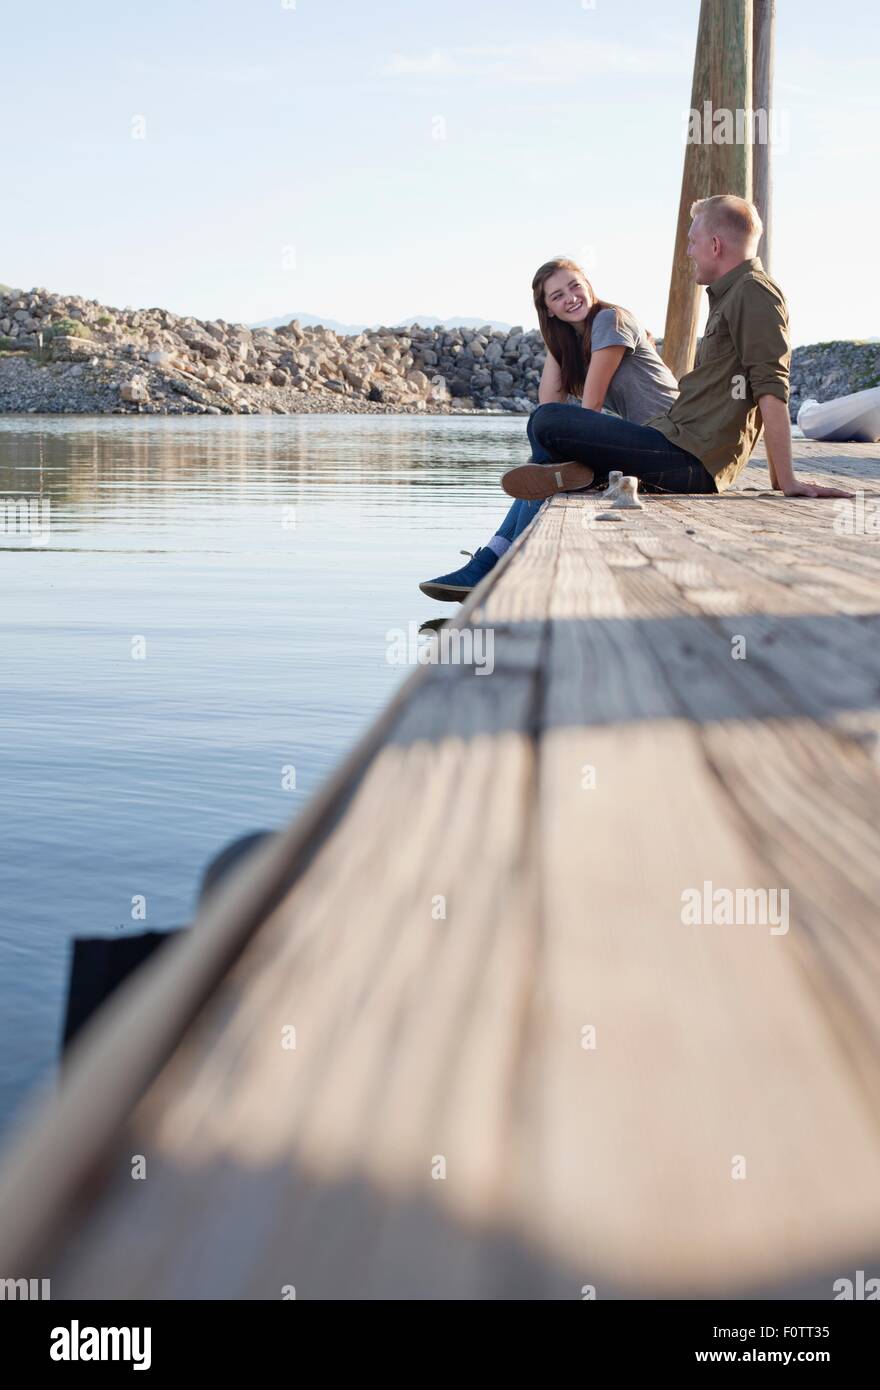 Side view of young couple sitting on wooden pier talking, Great Salt Lake, Utah, USA Stock Photo